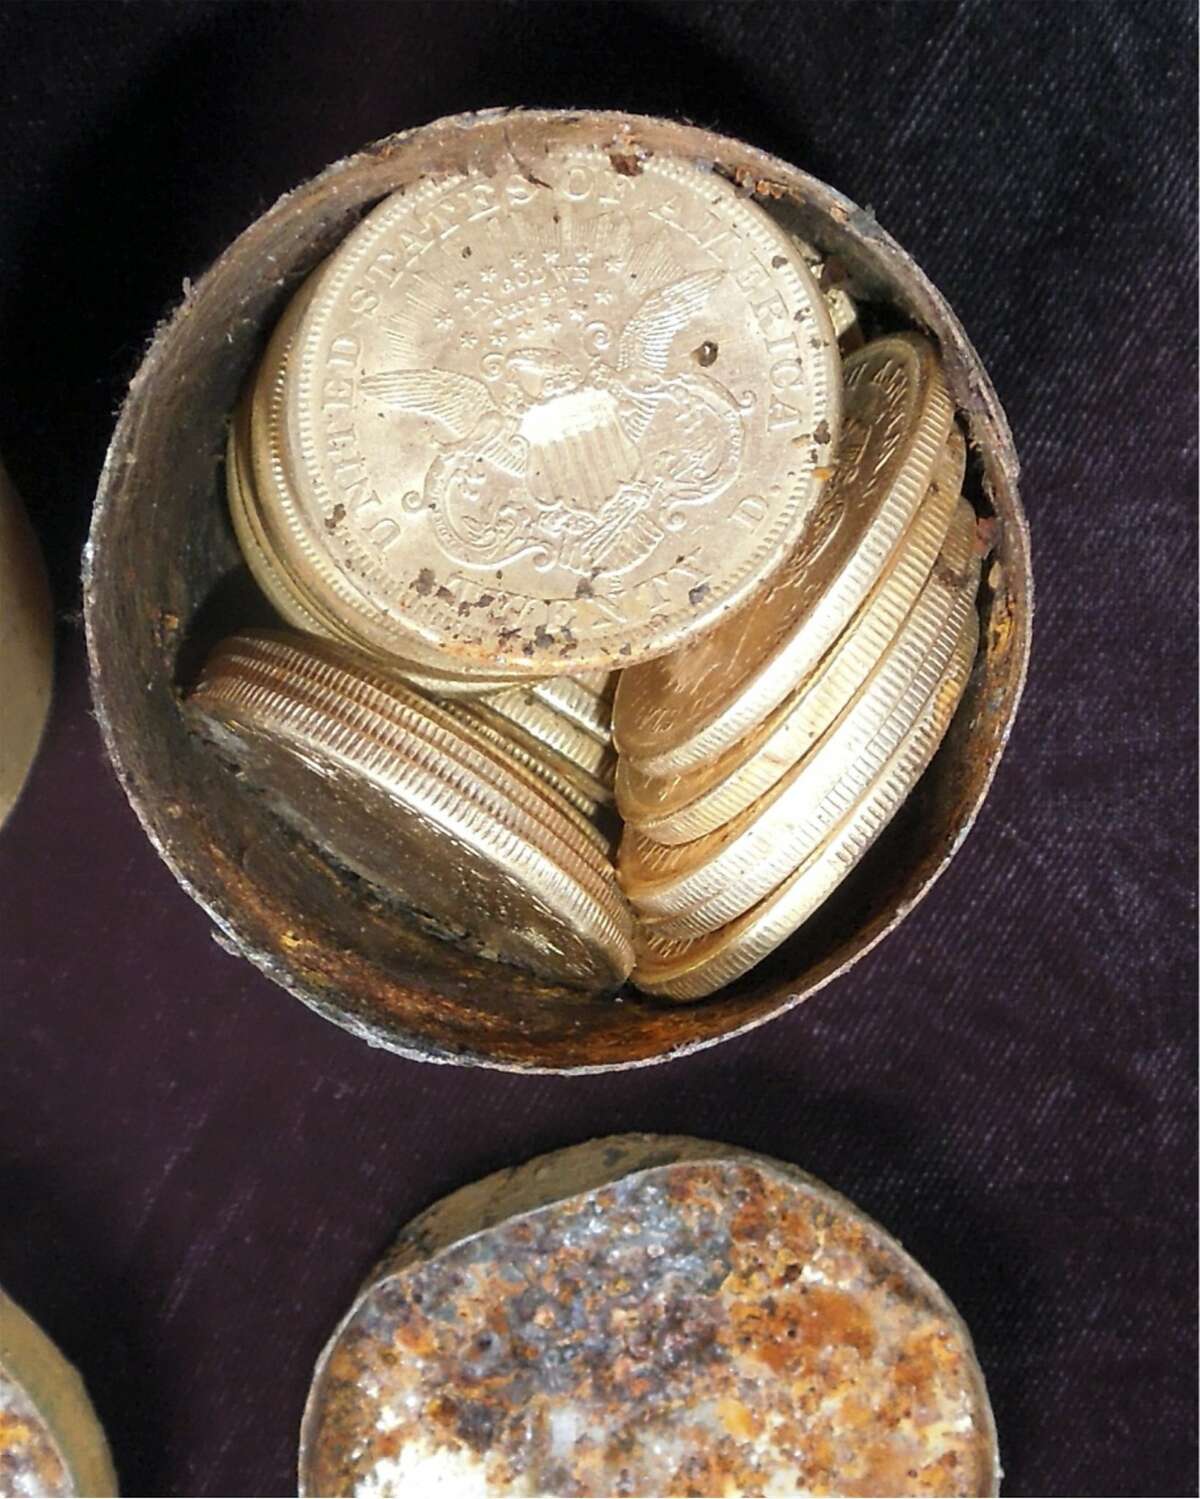 This image provided by the Saddle Ridge Hoard discoverers shows one of the six decaying metal canisters filled with 1800s-era U.S. gold coins unearthed in California by two people who want to remain anonymous. The value of the "Saddle Ridge Hoard" treasure trove is estimated at $10 million or more.